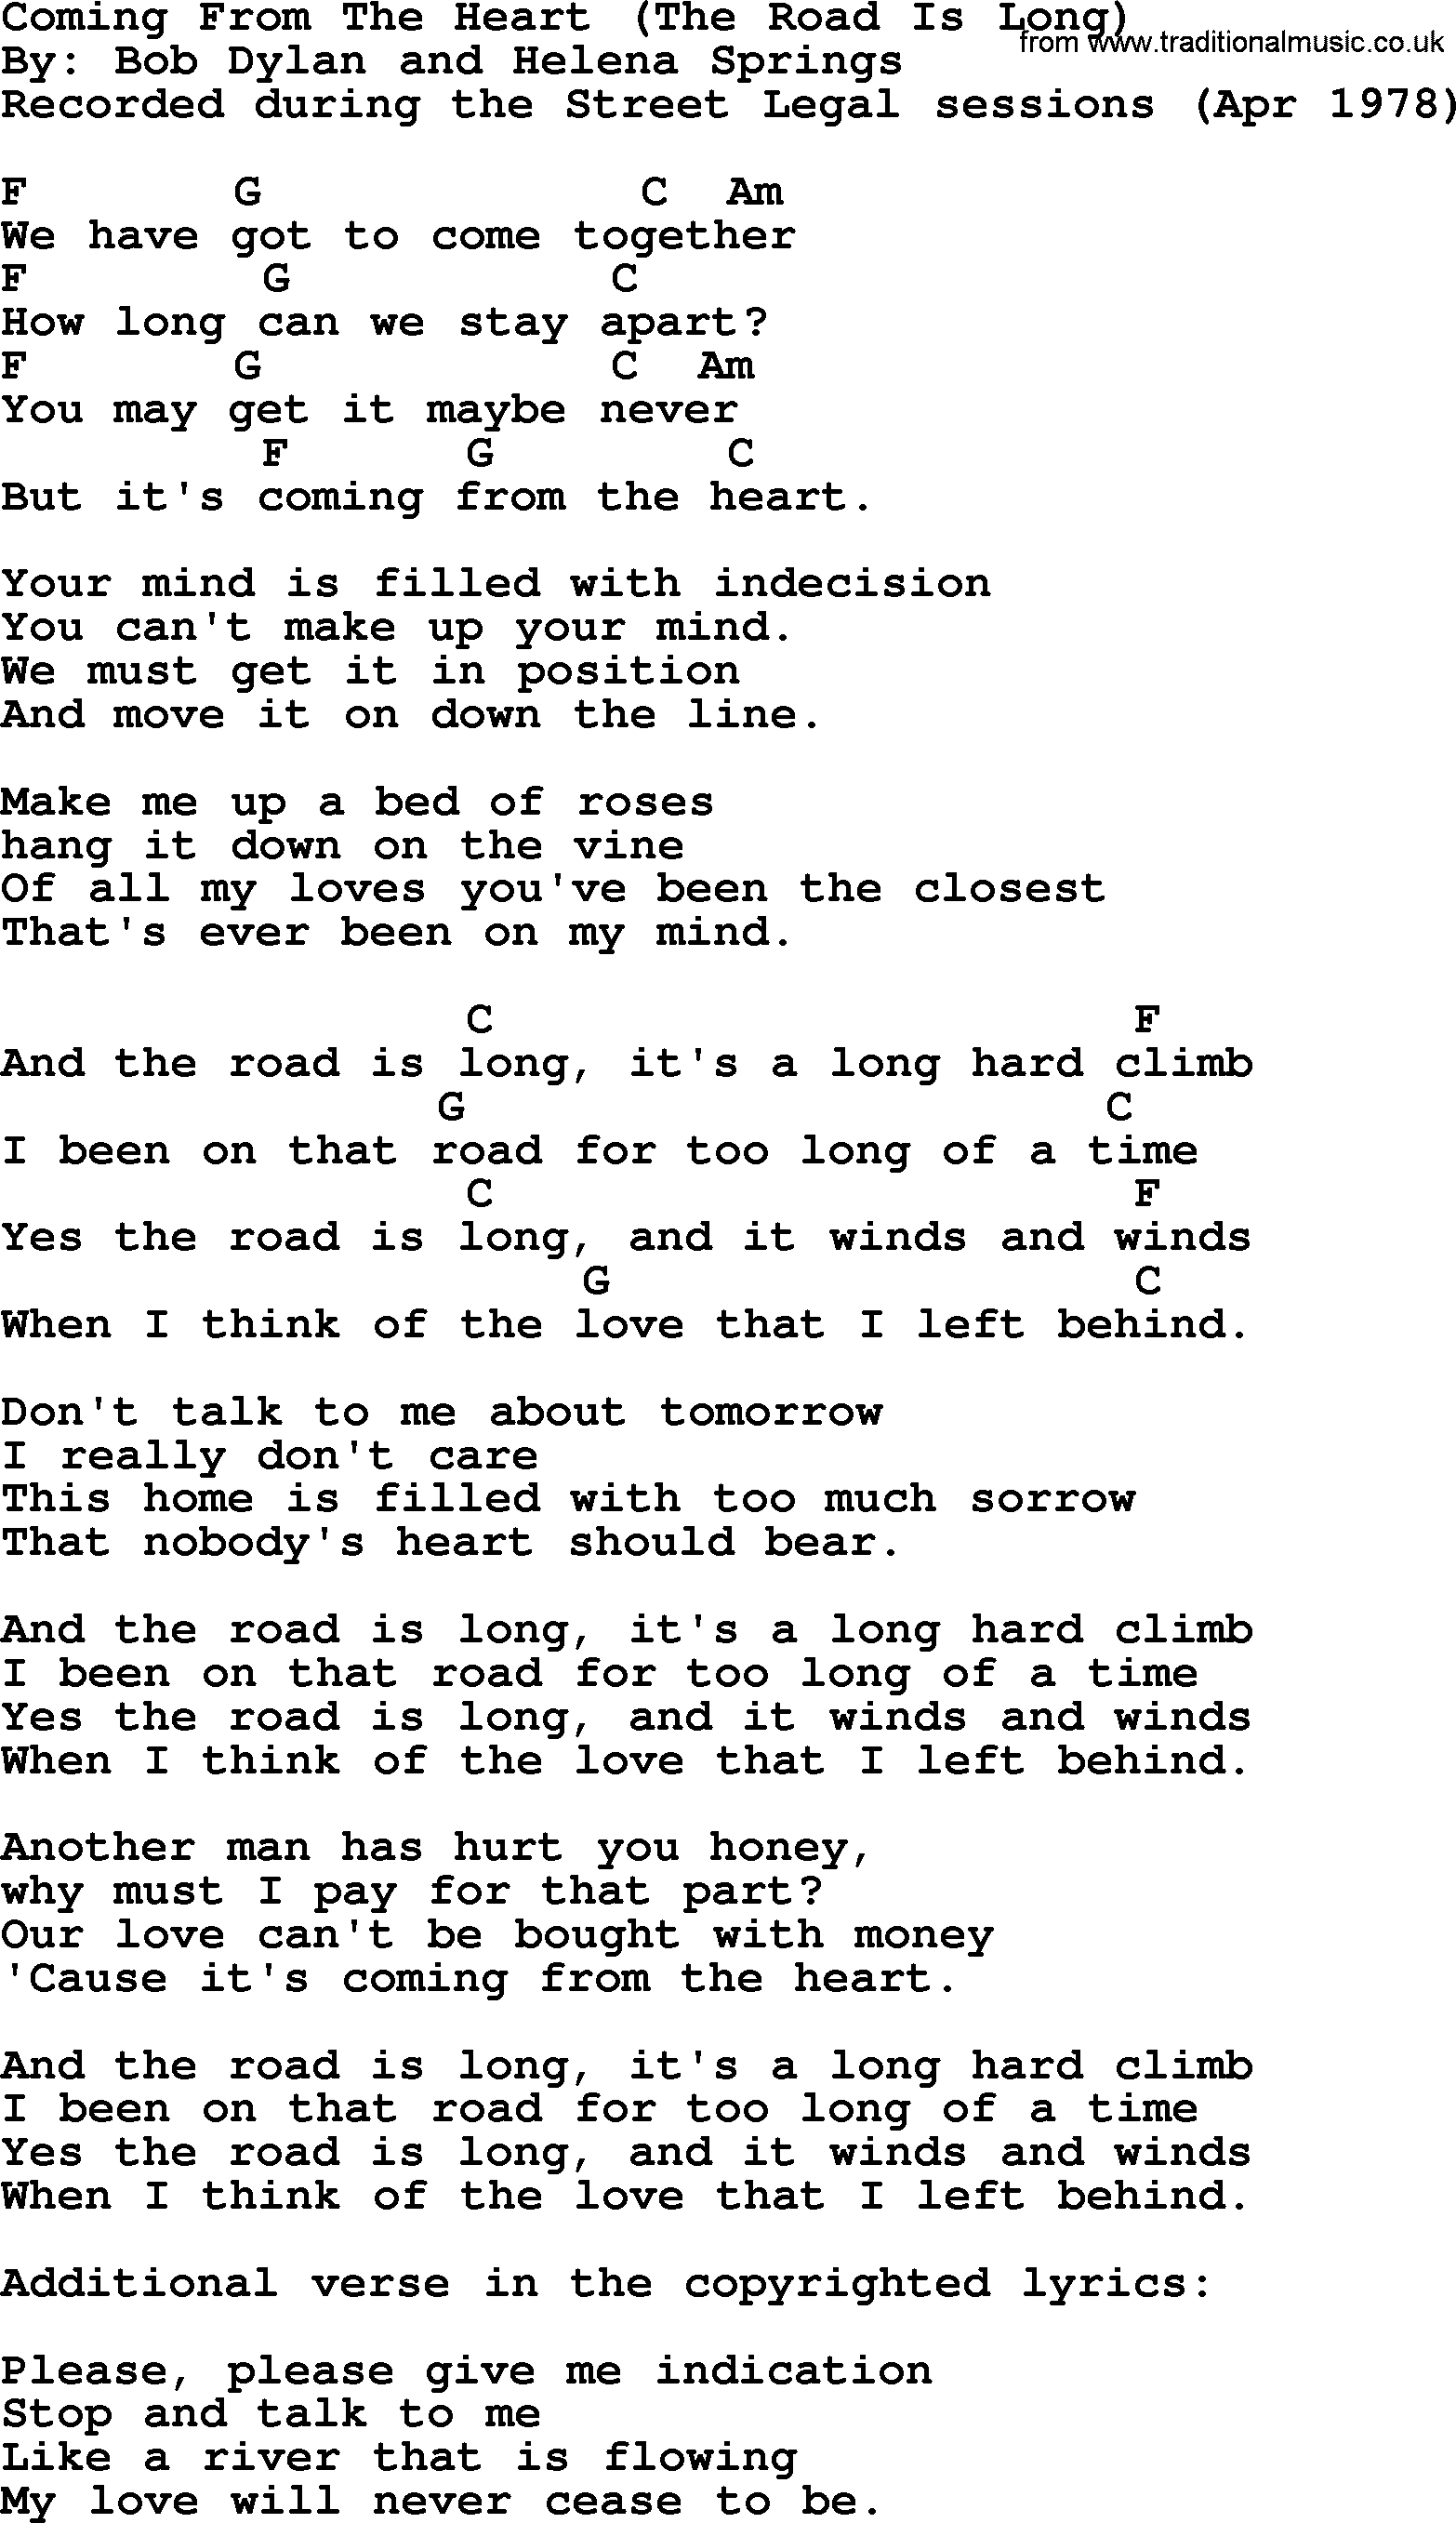 Bob Dylan song, lyrics with chords - Coming From The Heart (The Road Is Long)